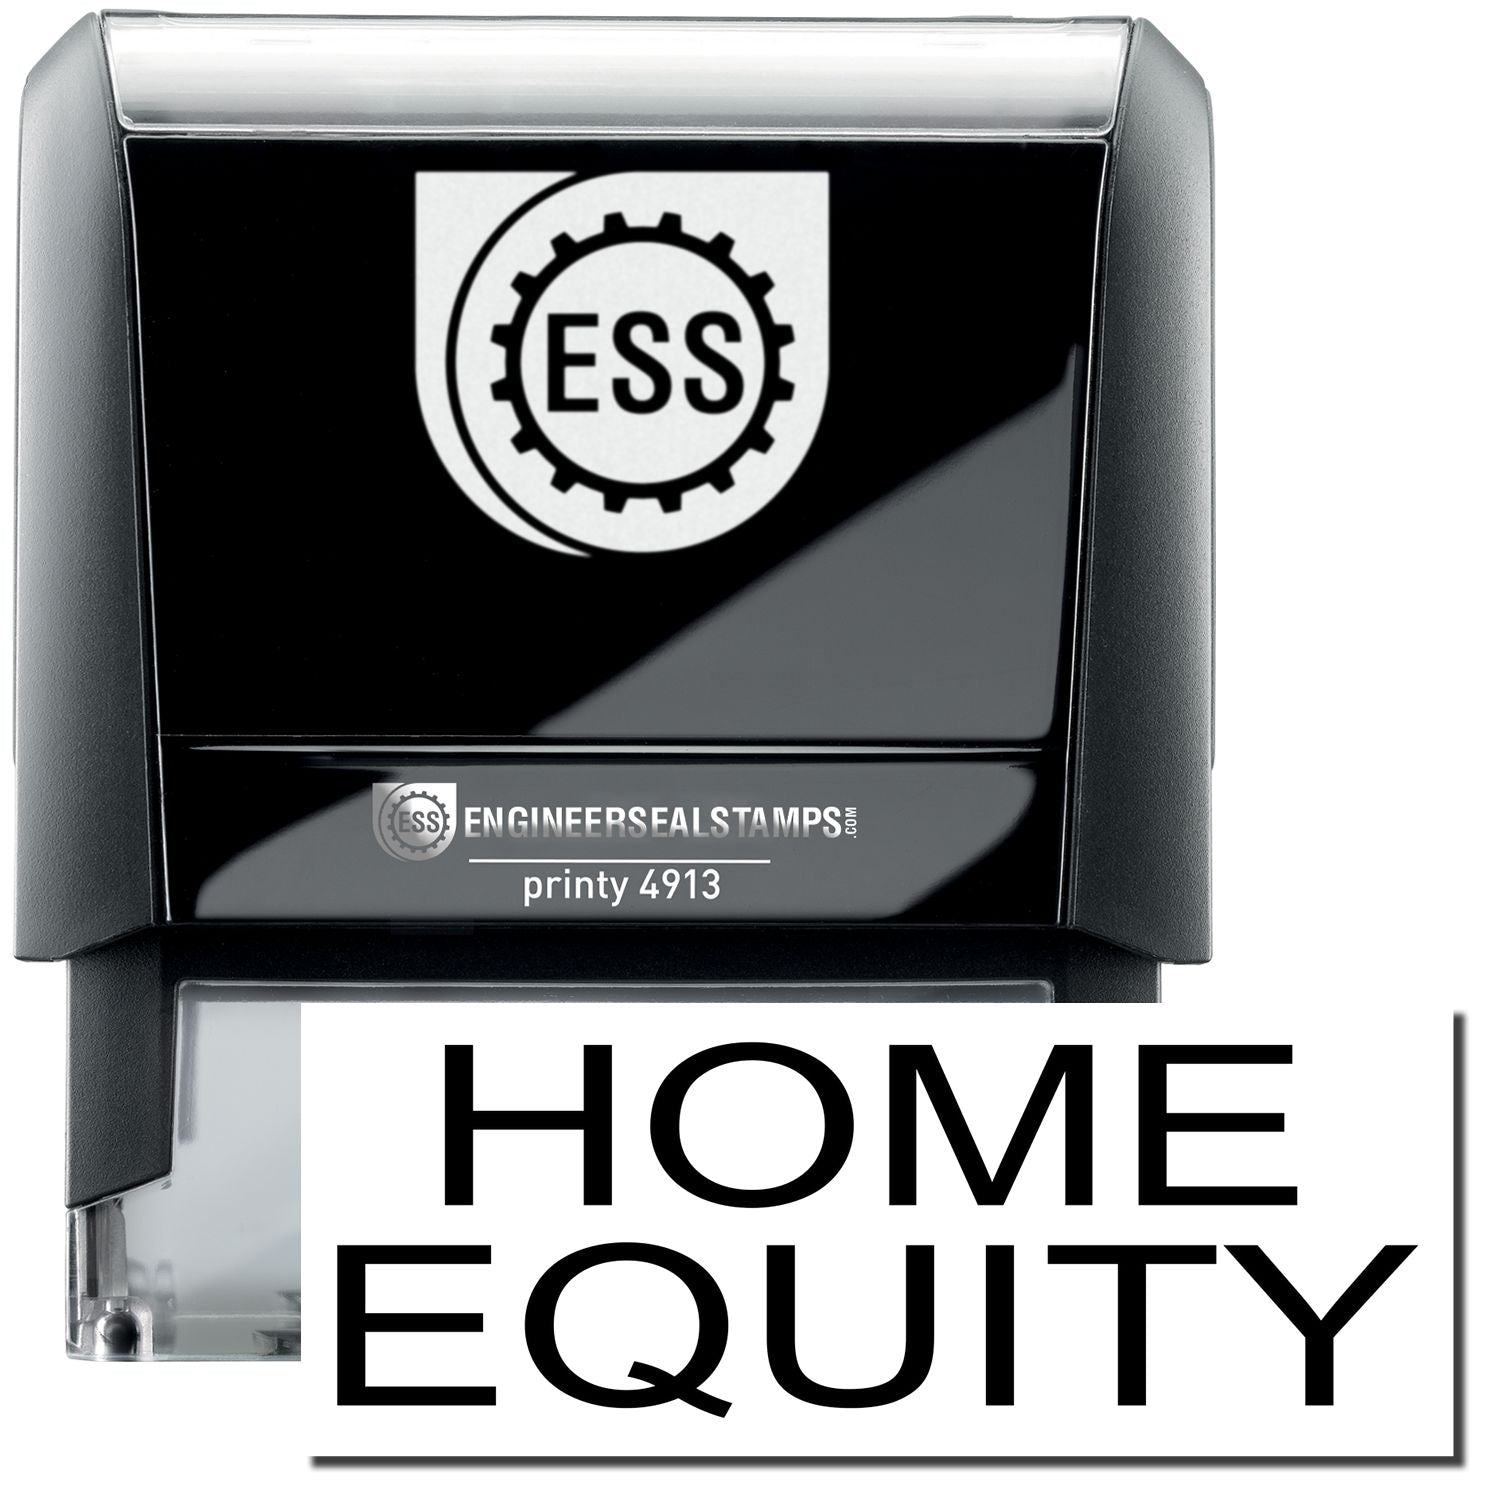 A self-inking stamp with a stamped image showing how the text "HOME EQUITY" in a large bold font is displayed by it.